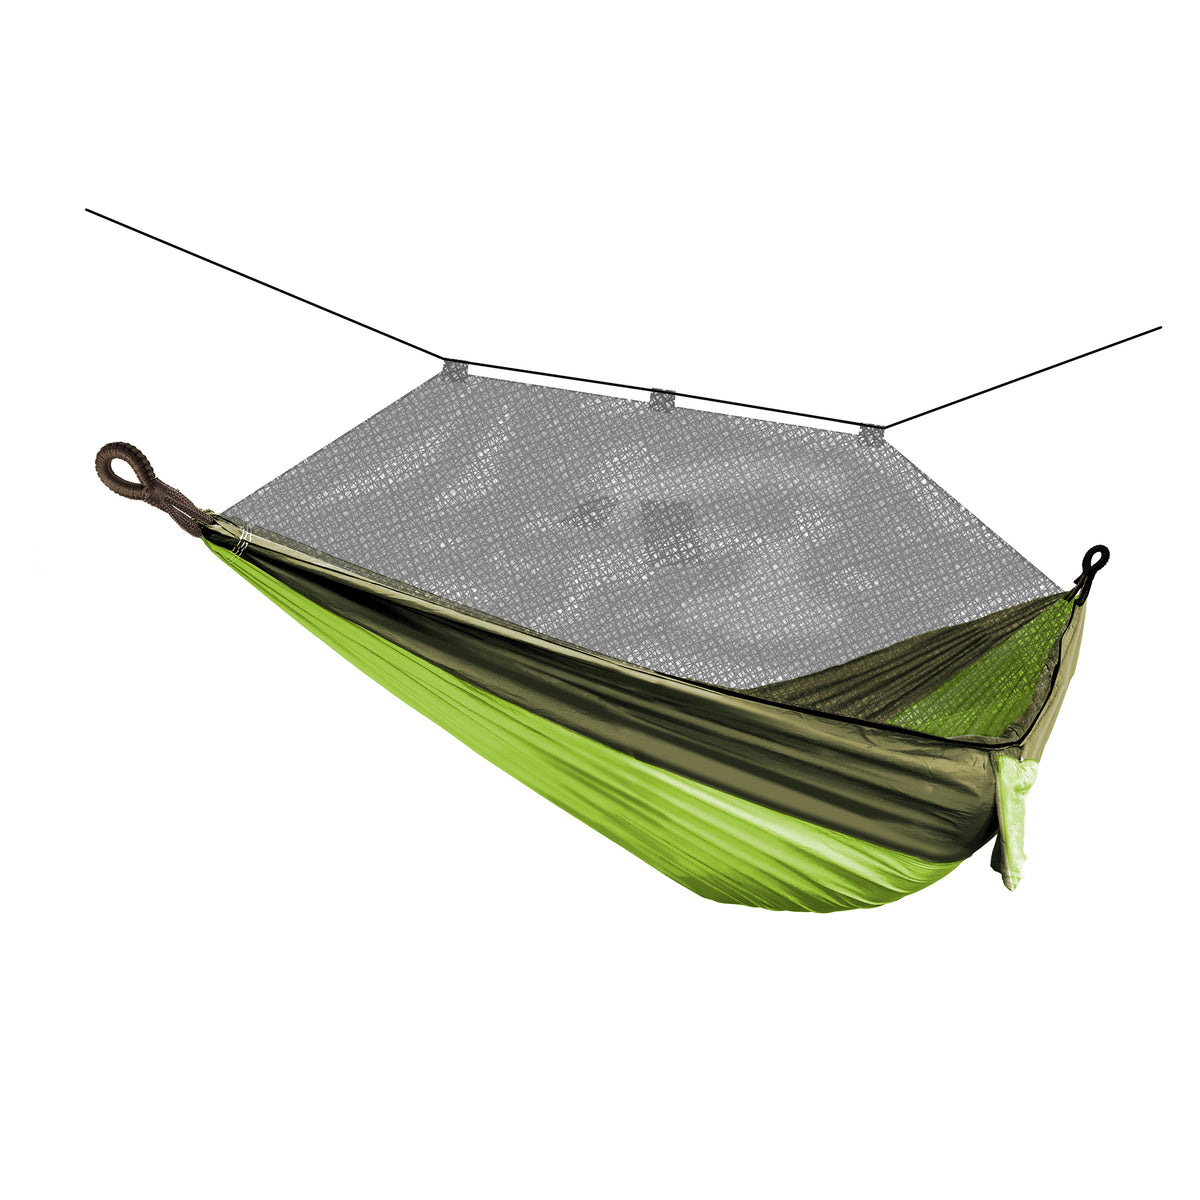 Bliss Hammocks 54-inch Wide Hammock in a Bag with mosquito net, inside pocket, and tree straps in the forest green variation.